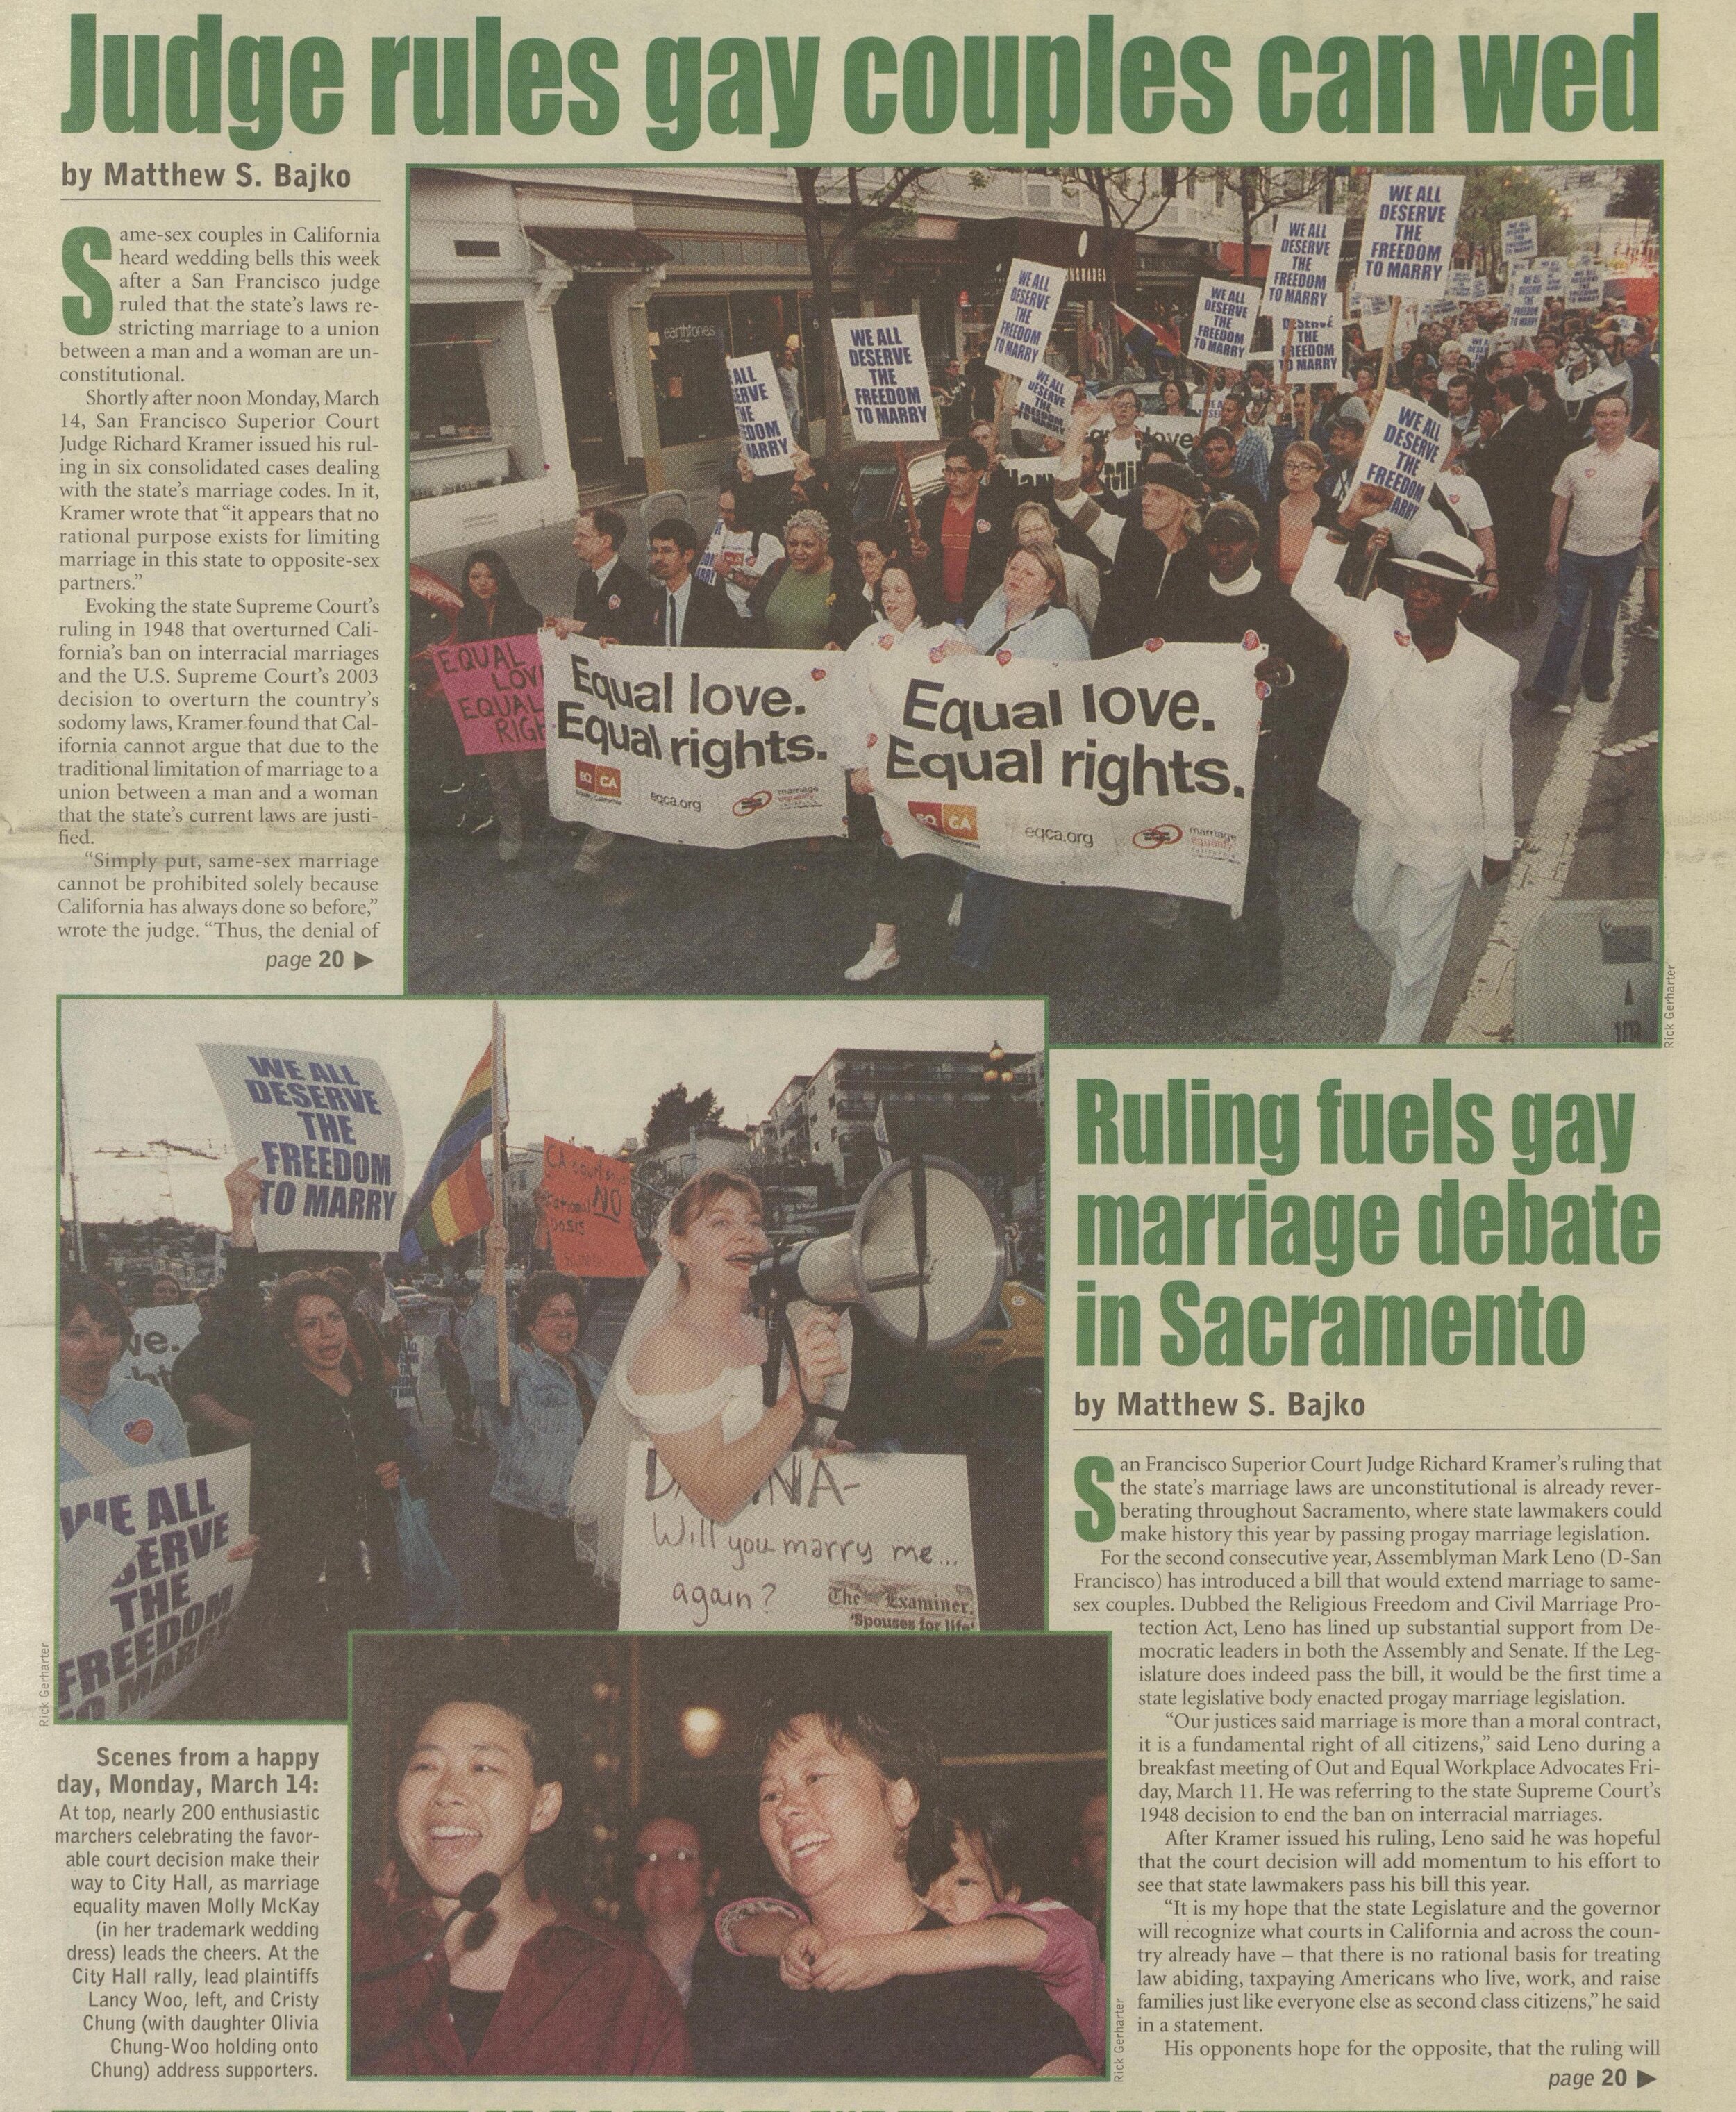  Vol. 35, No. 11, March 17, 2005.     Full Issue   